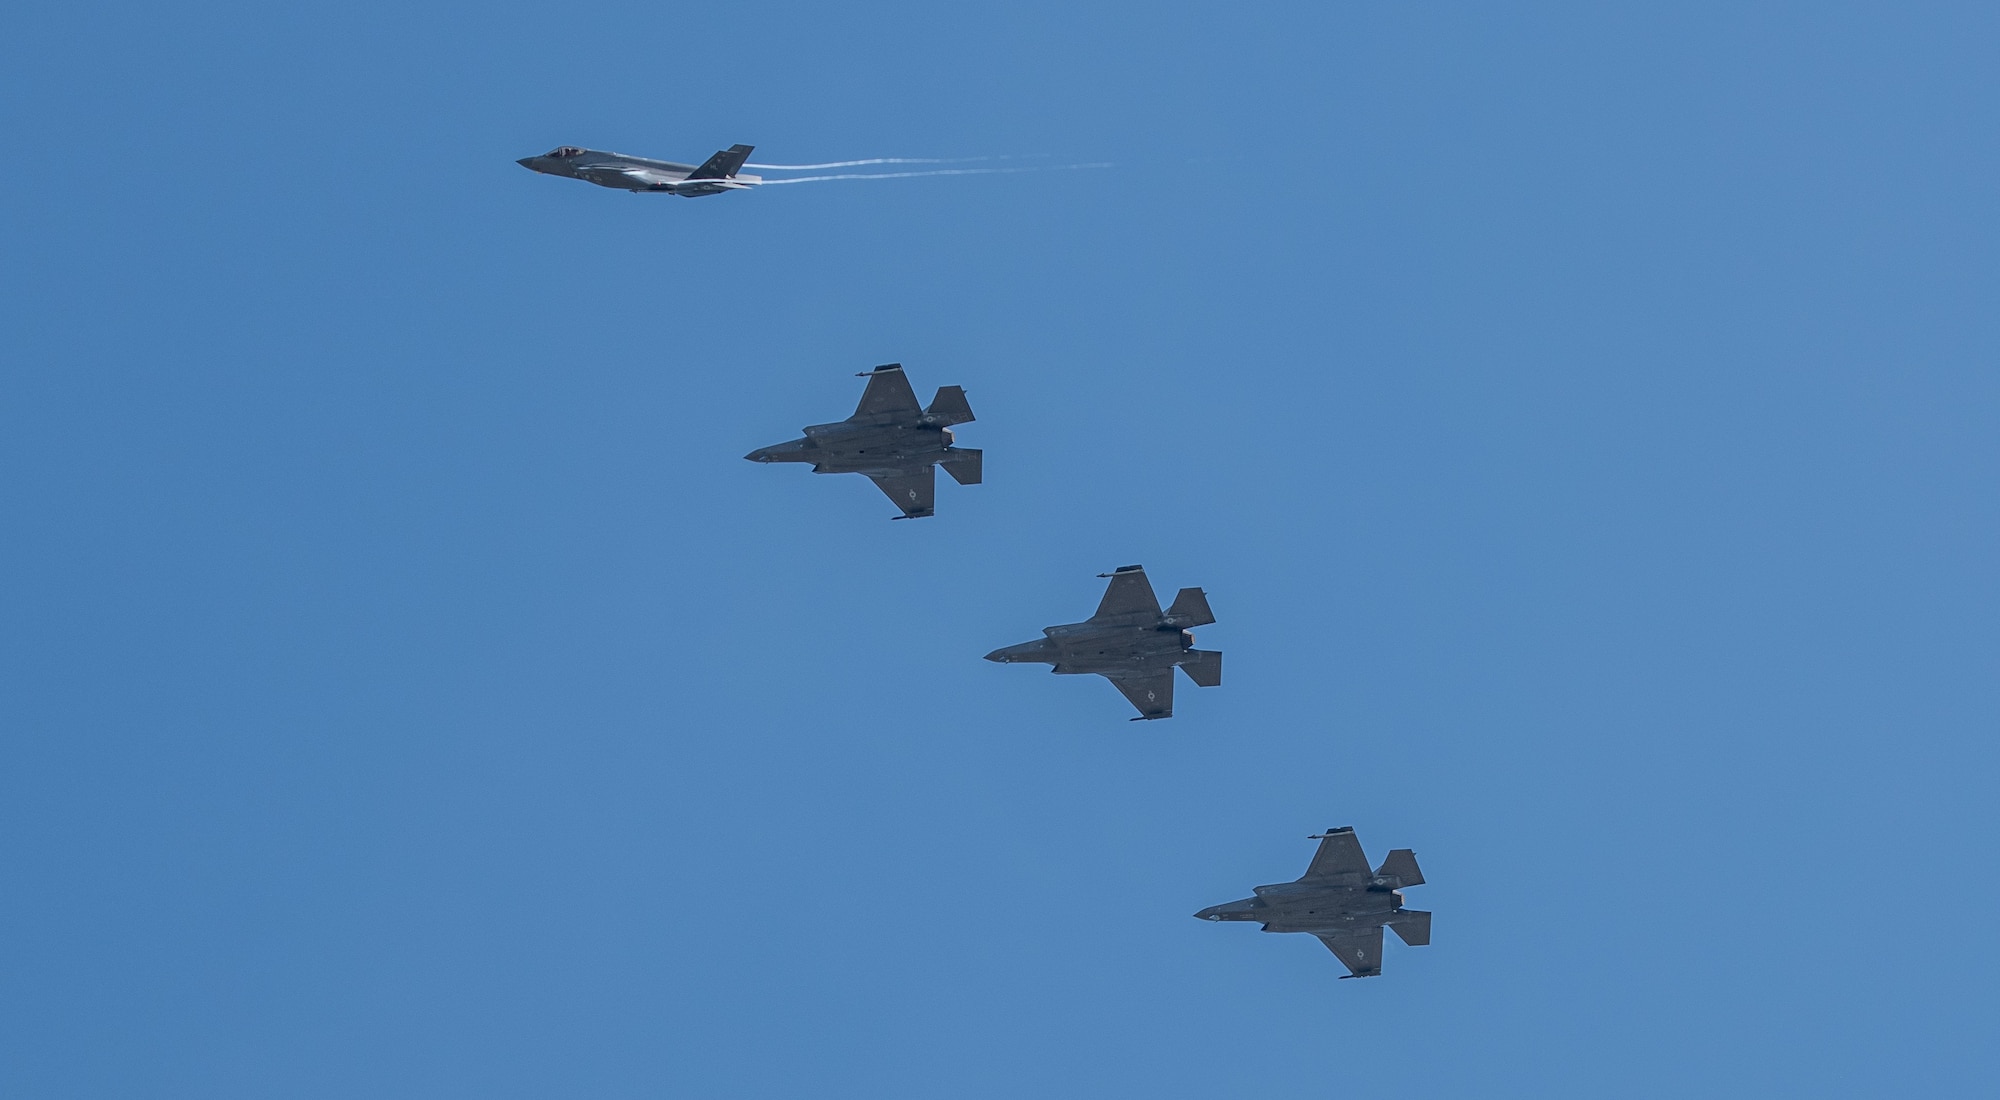 Four F-35A Lightning IIs from Hill Air Force Base, Utah, take flight during Sentry Savannah in Georgia. The 419th Fighter Wing at Hill AFB sent Air Force reservists and F-35s to support the Air National Guard’s largest fourth- and fifth-generation fighter aircraft exercise.